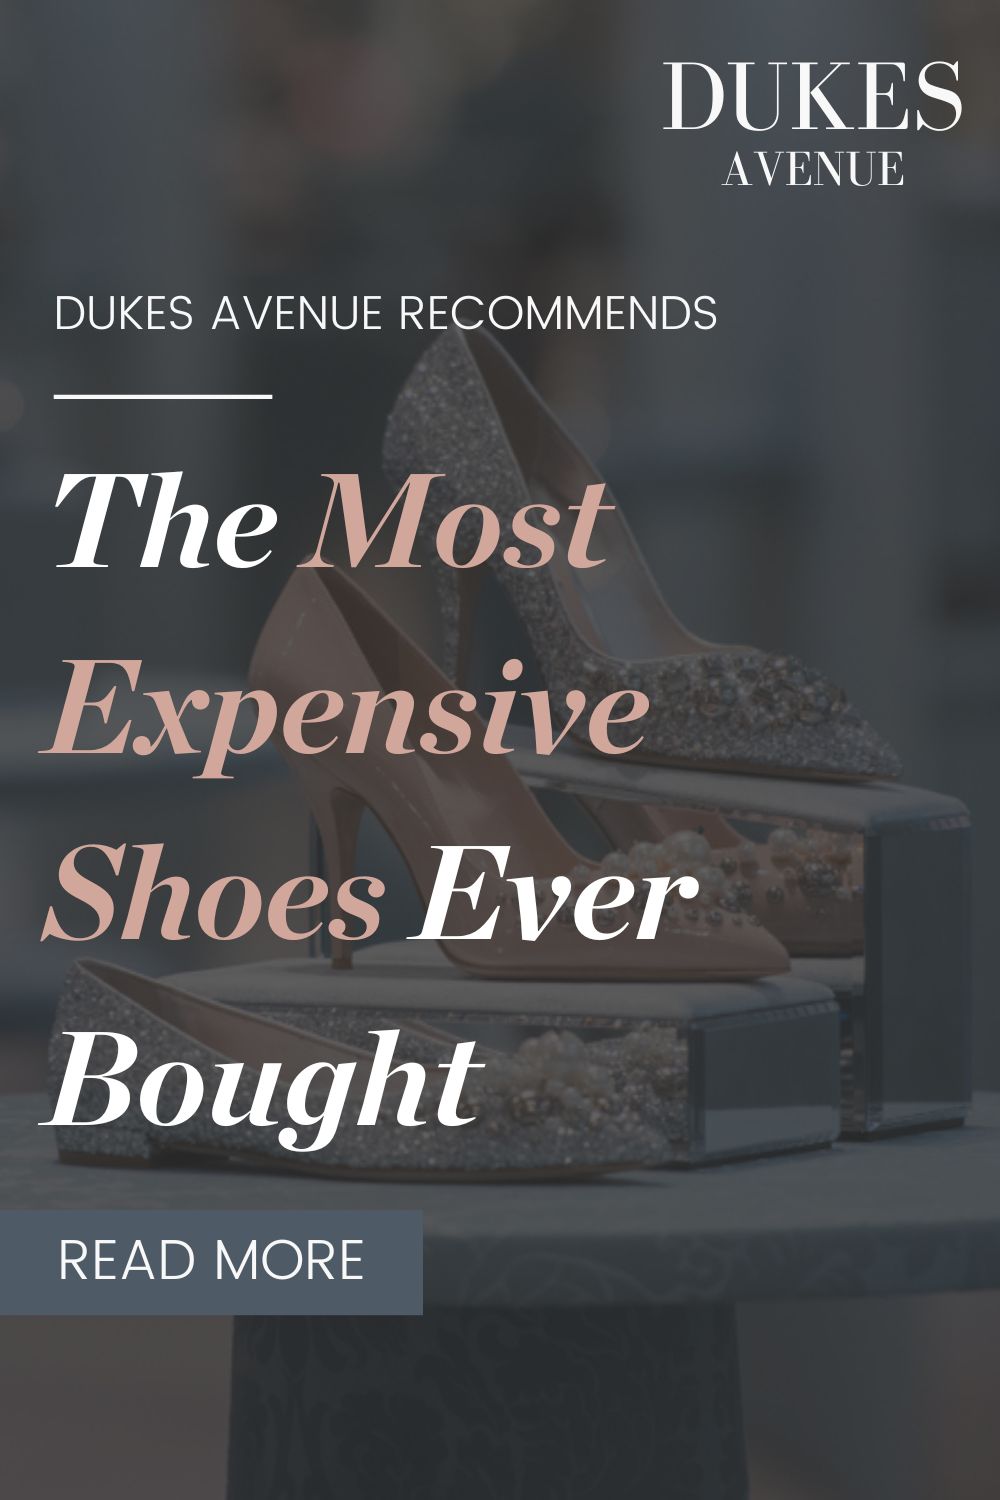 Image of expensive shoes with text overlay 'The Most Expensive Shoes Ever Bought'